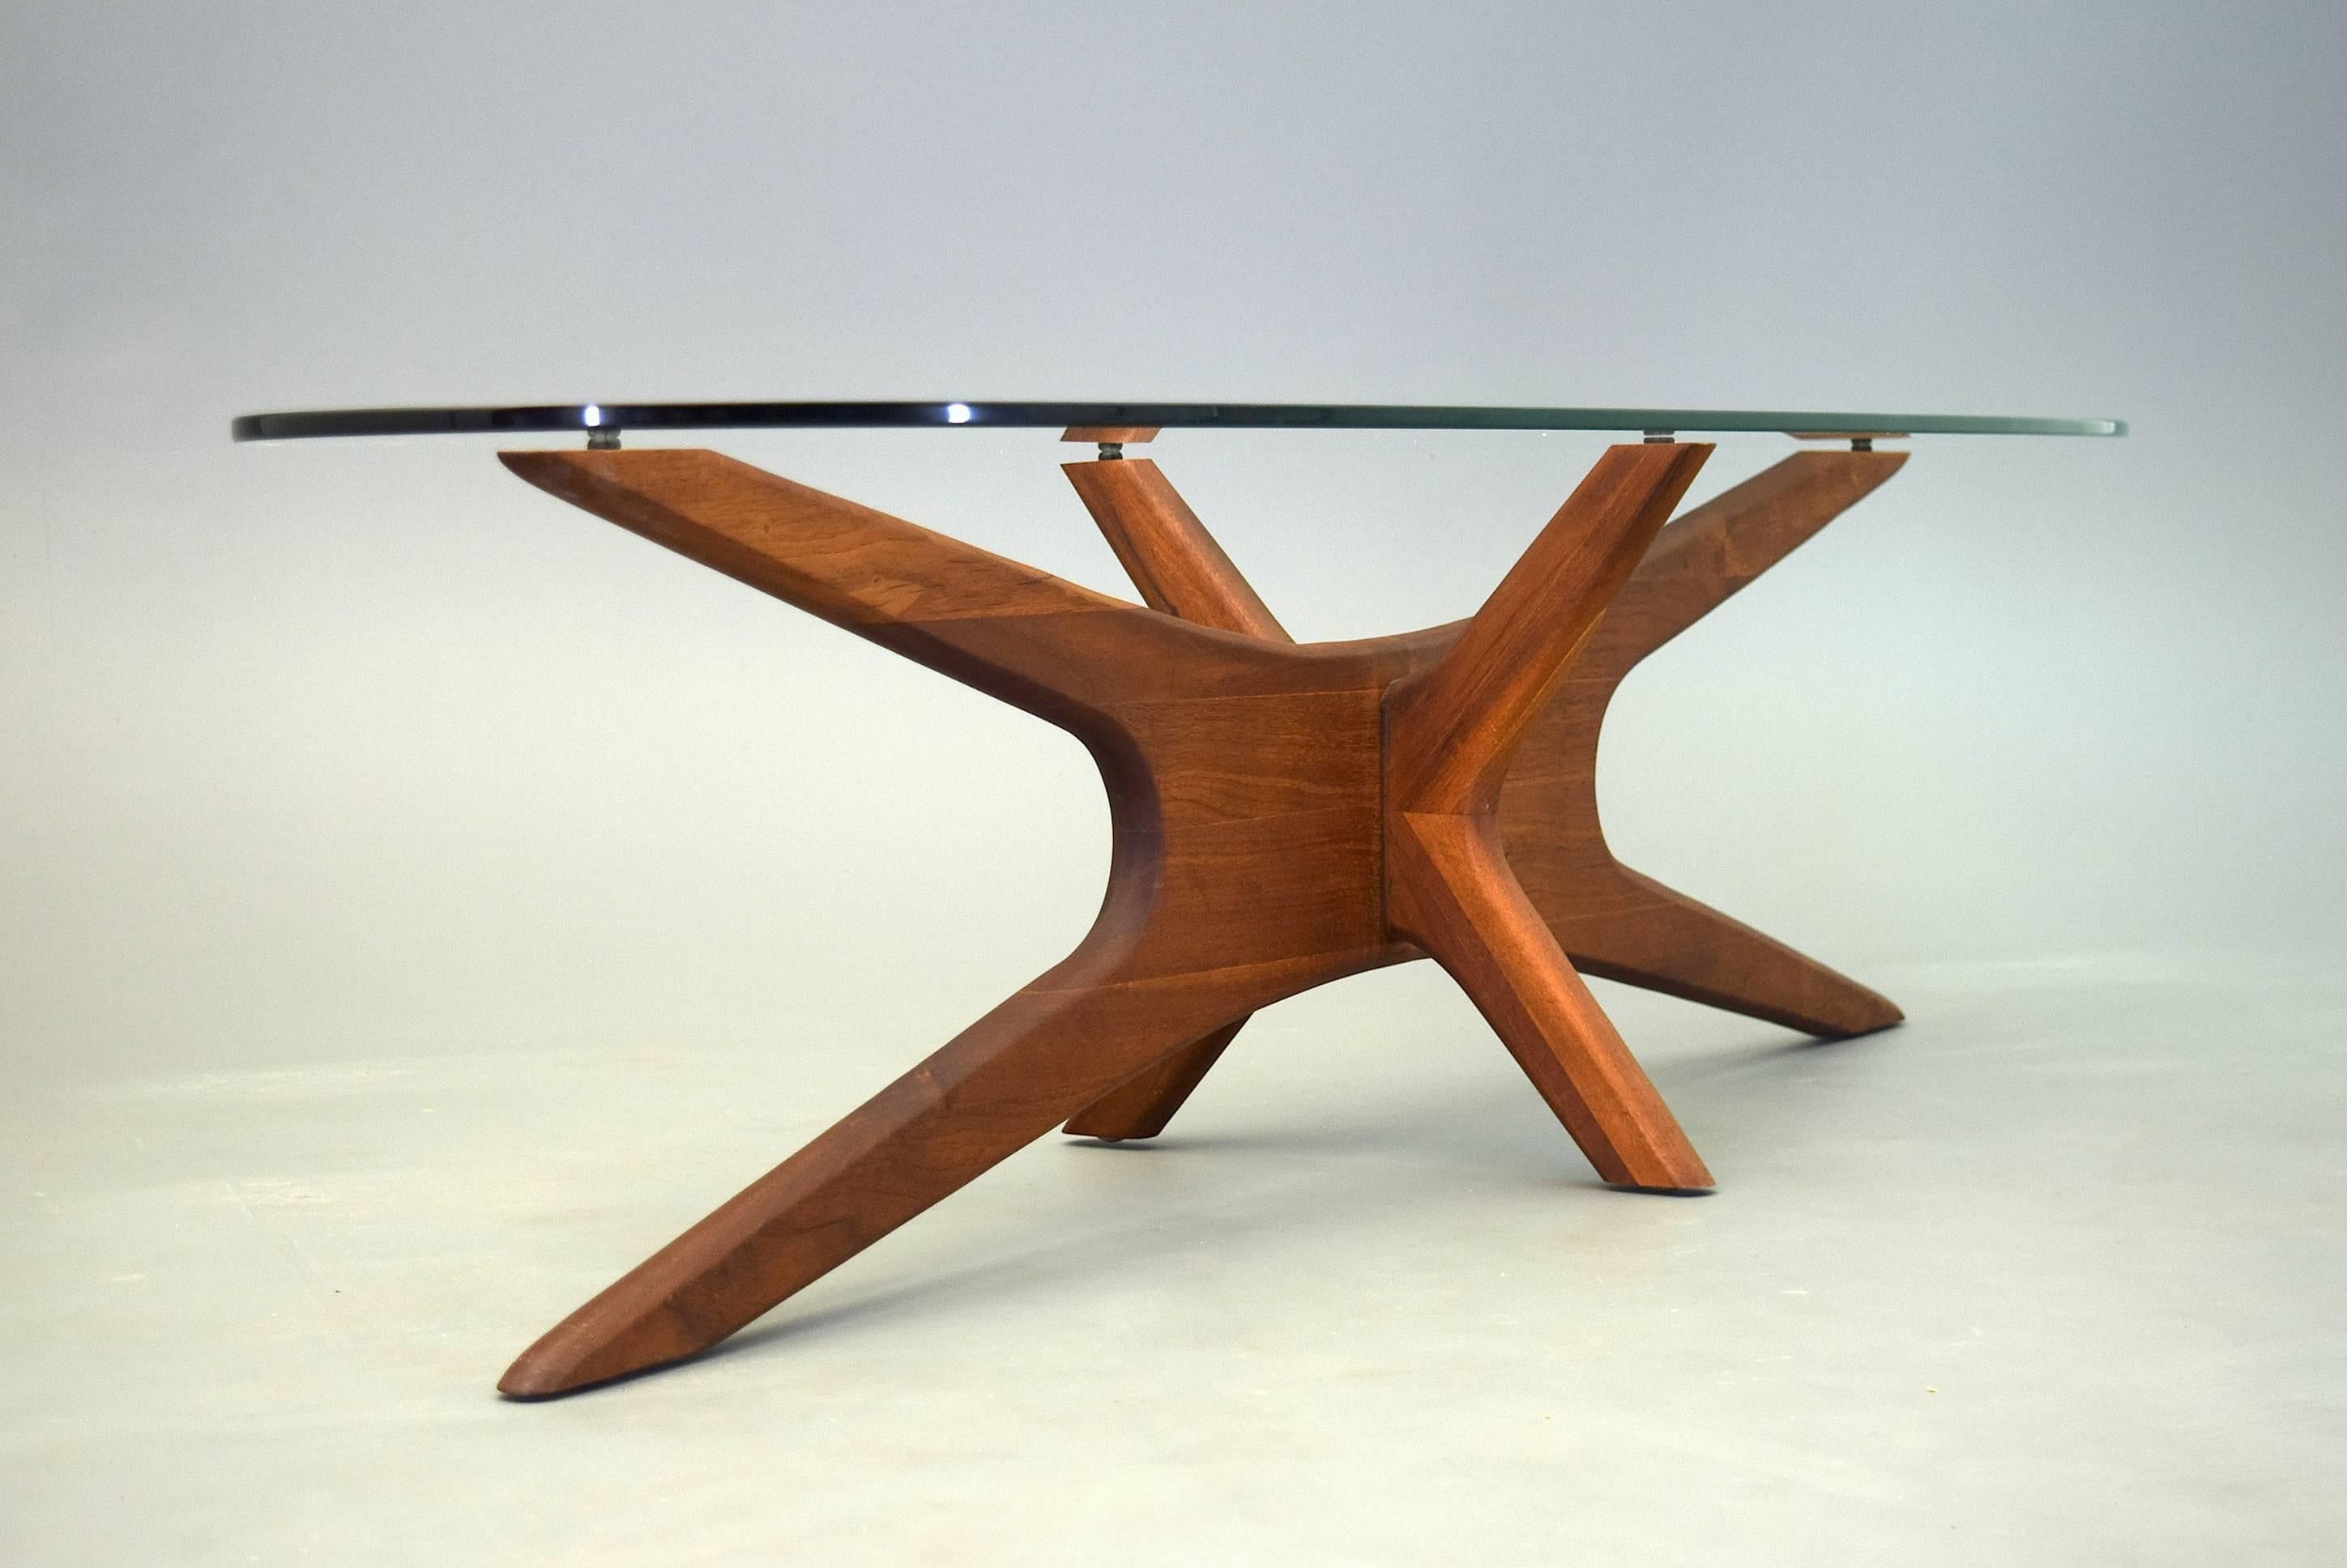 Gorgeous iconic Jax coffee table designed by Adrian Pearsall for Craft Associates. This large abstract coffee table measures 19.75